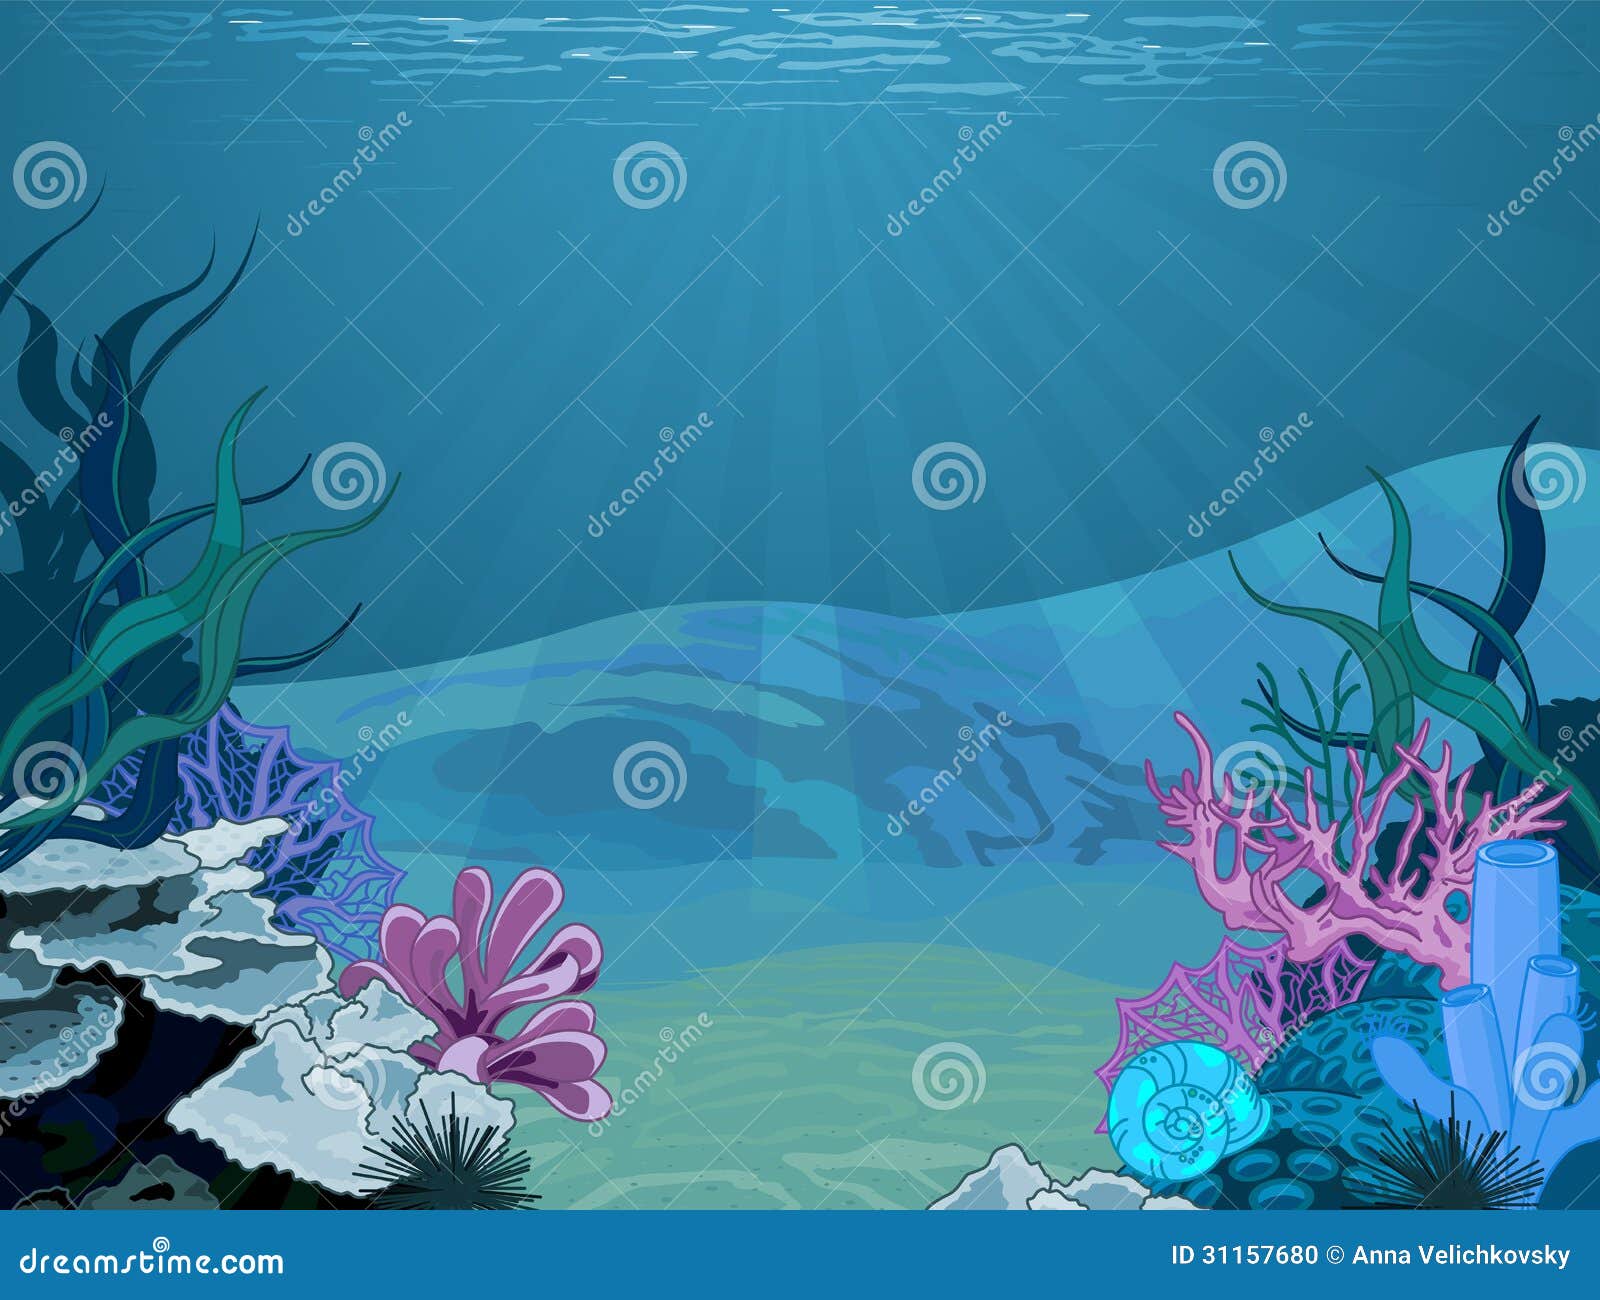 underwater clipart images - photo #21